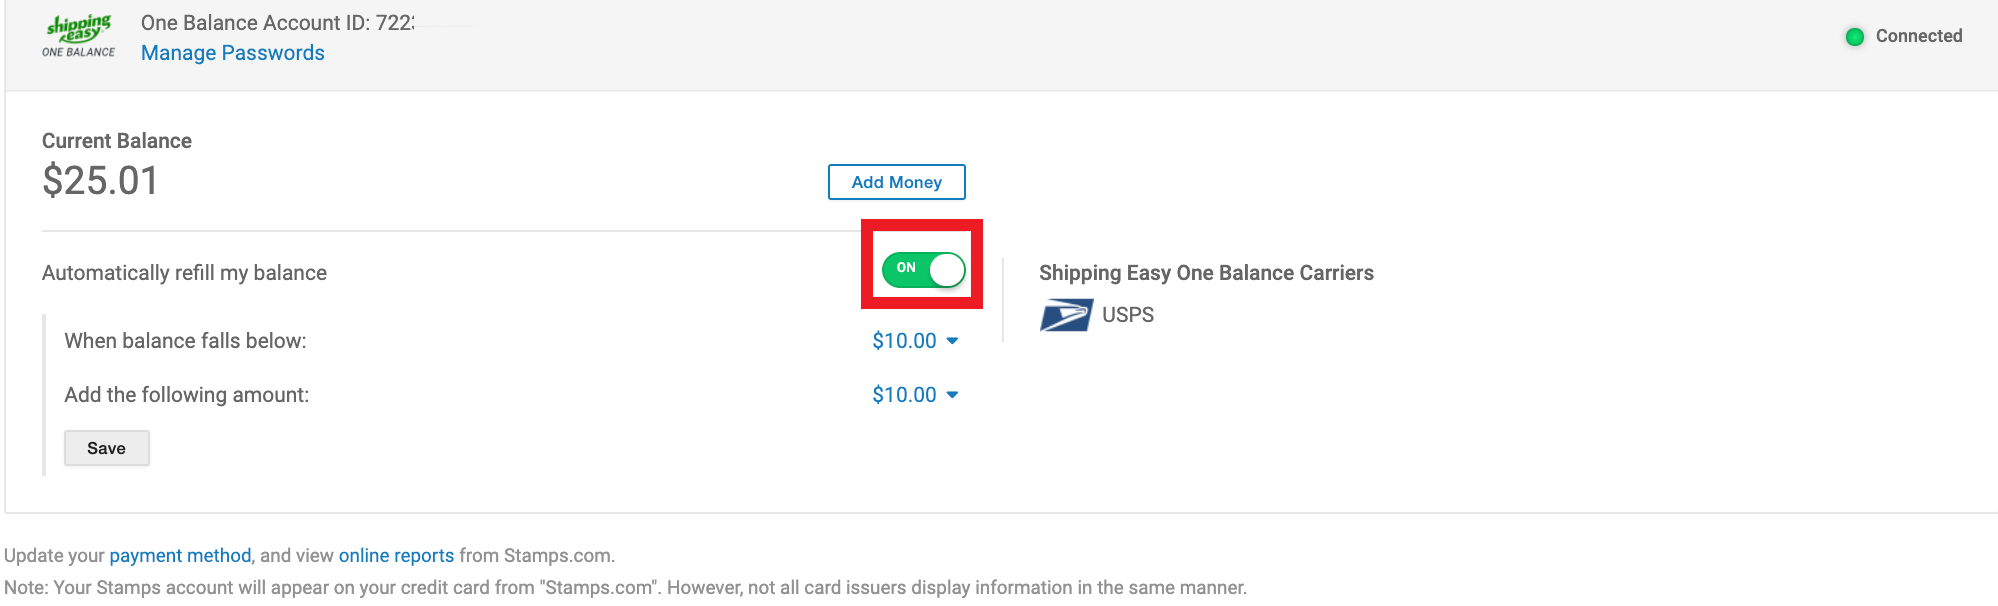 Box highlights toggle shown activated to automatically refill account balance